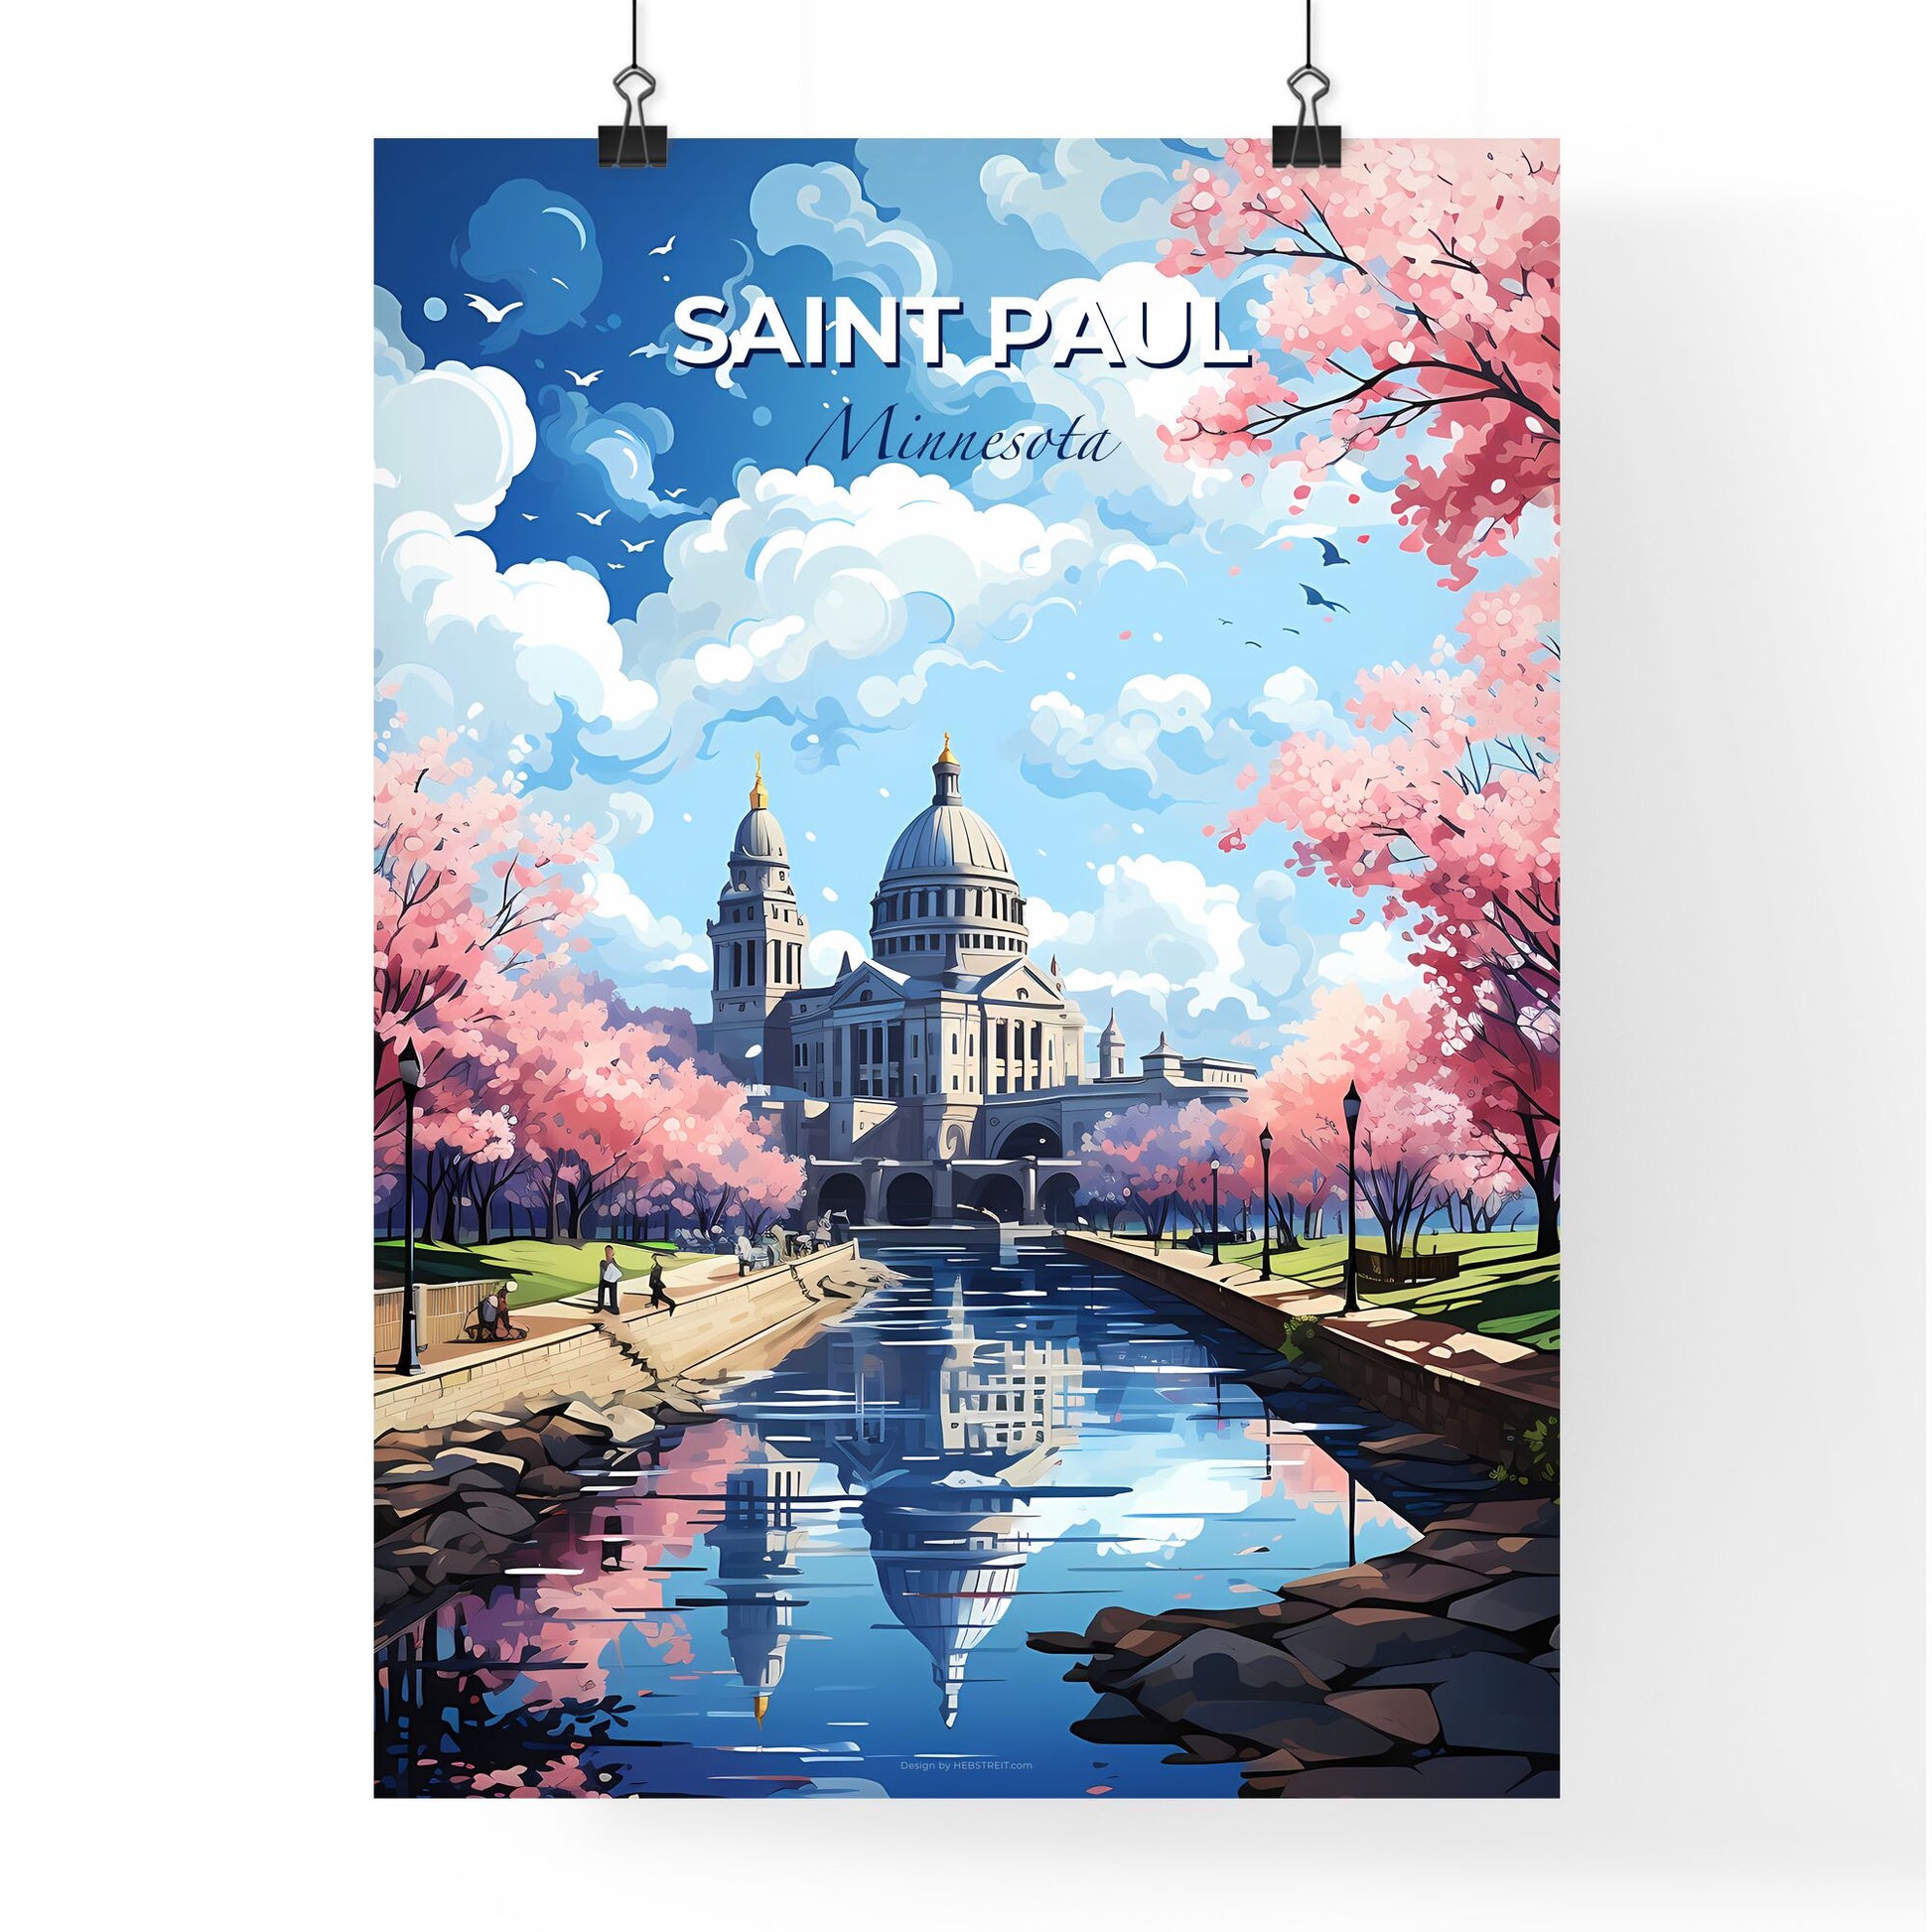 Saint Paul Minnesota Skyline - A Water Canal With A Building And Trees - Customizable Travel Gift Default Title